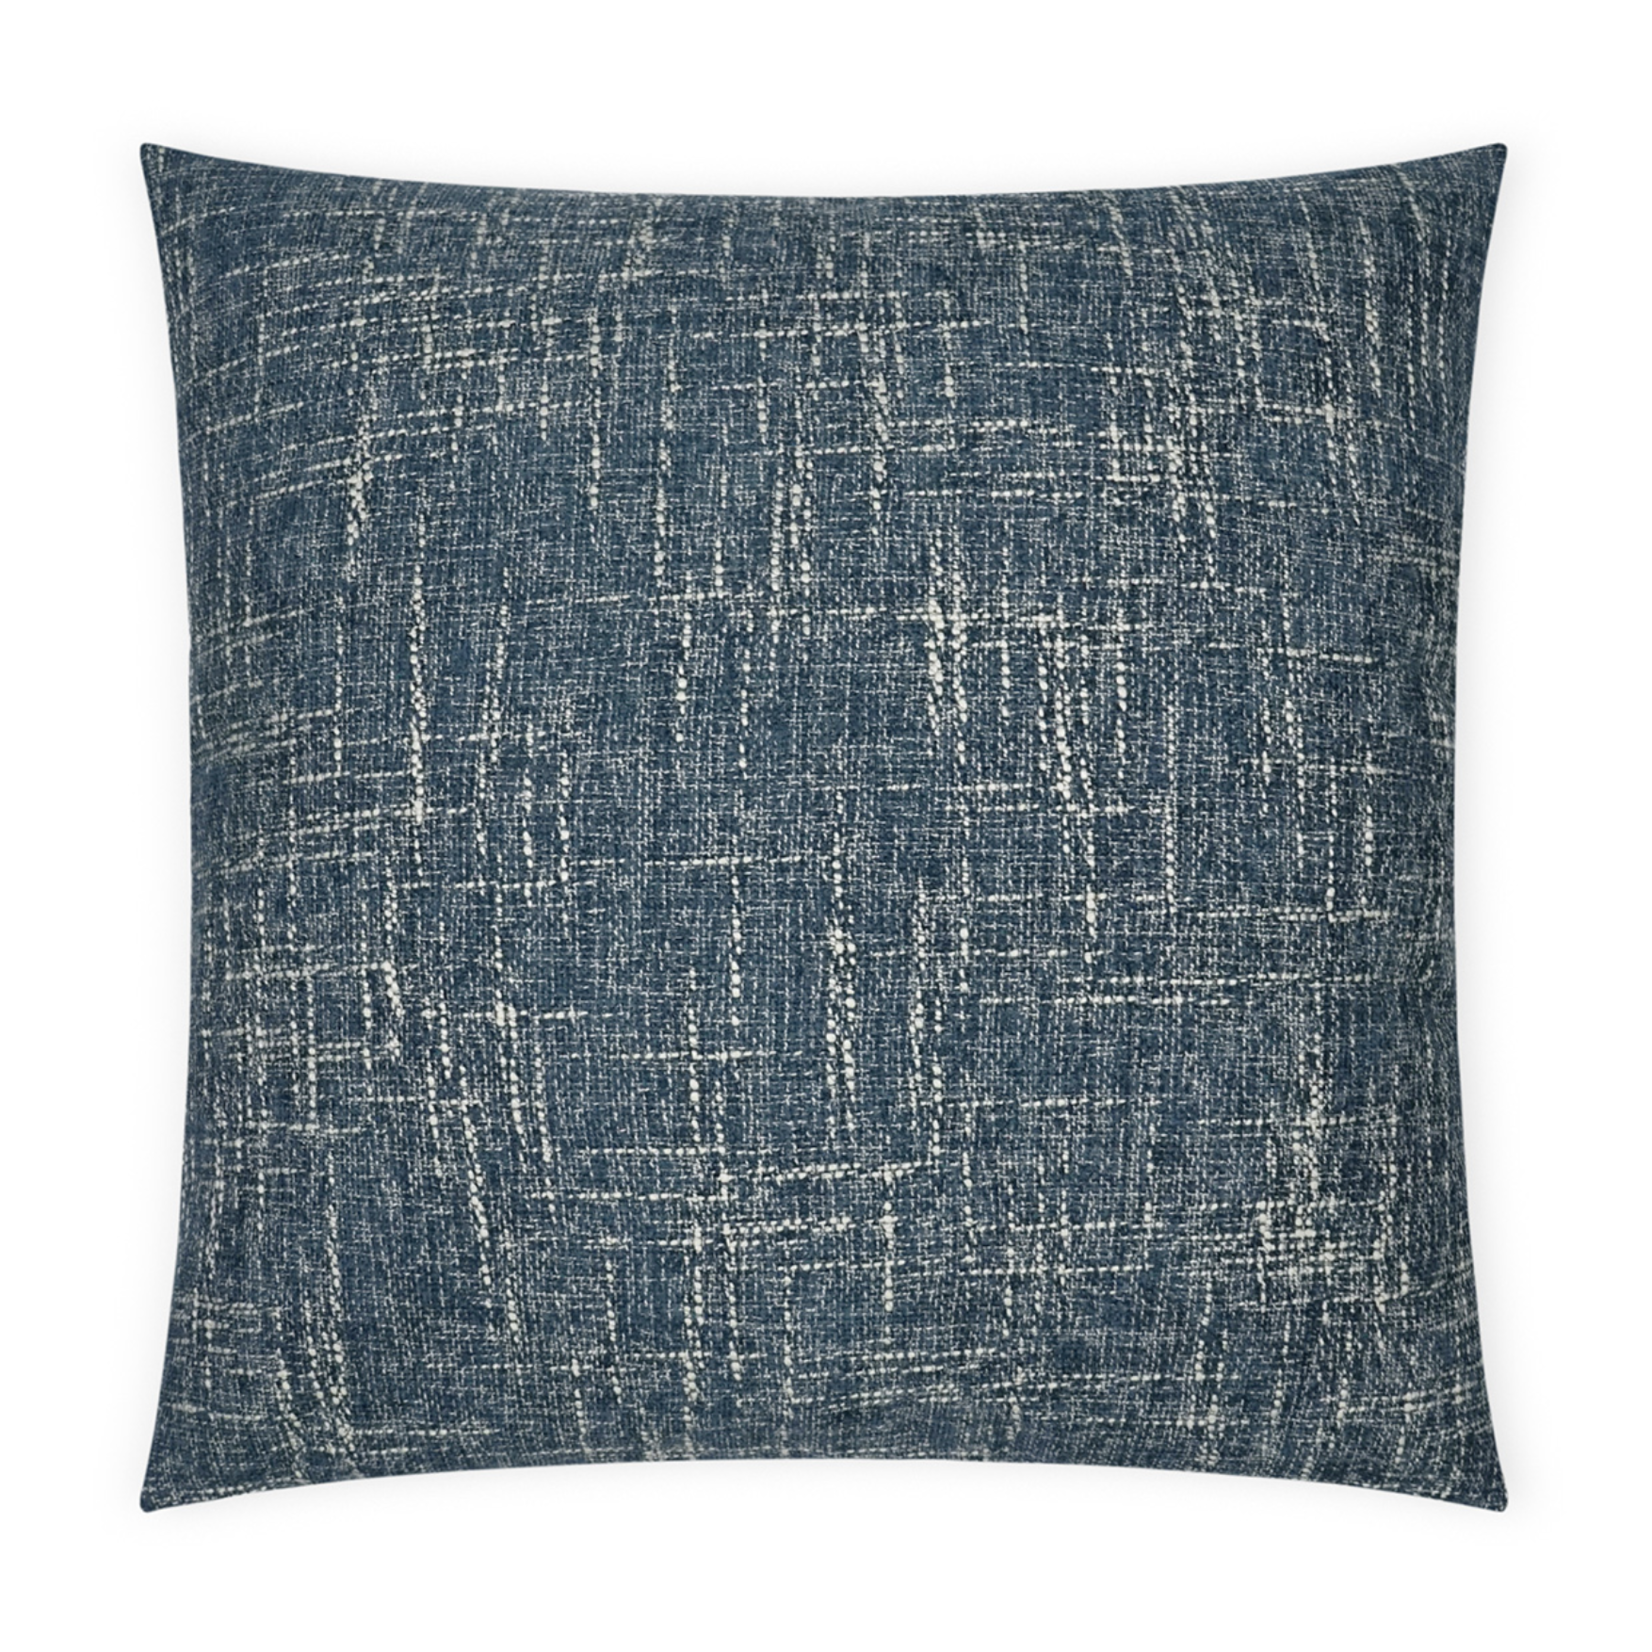 Outside The Box 24x24 Zareen Square Feather Down Pillow In Denim